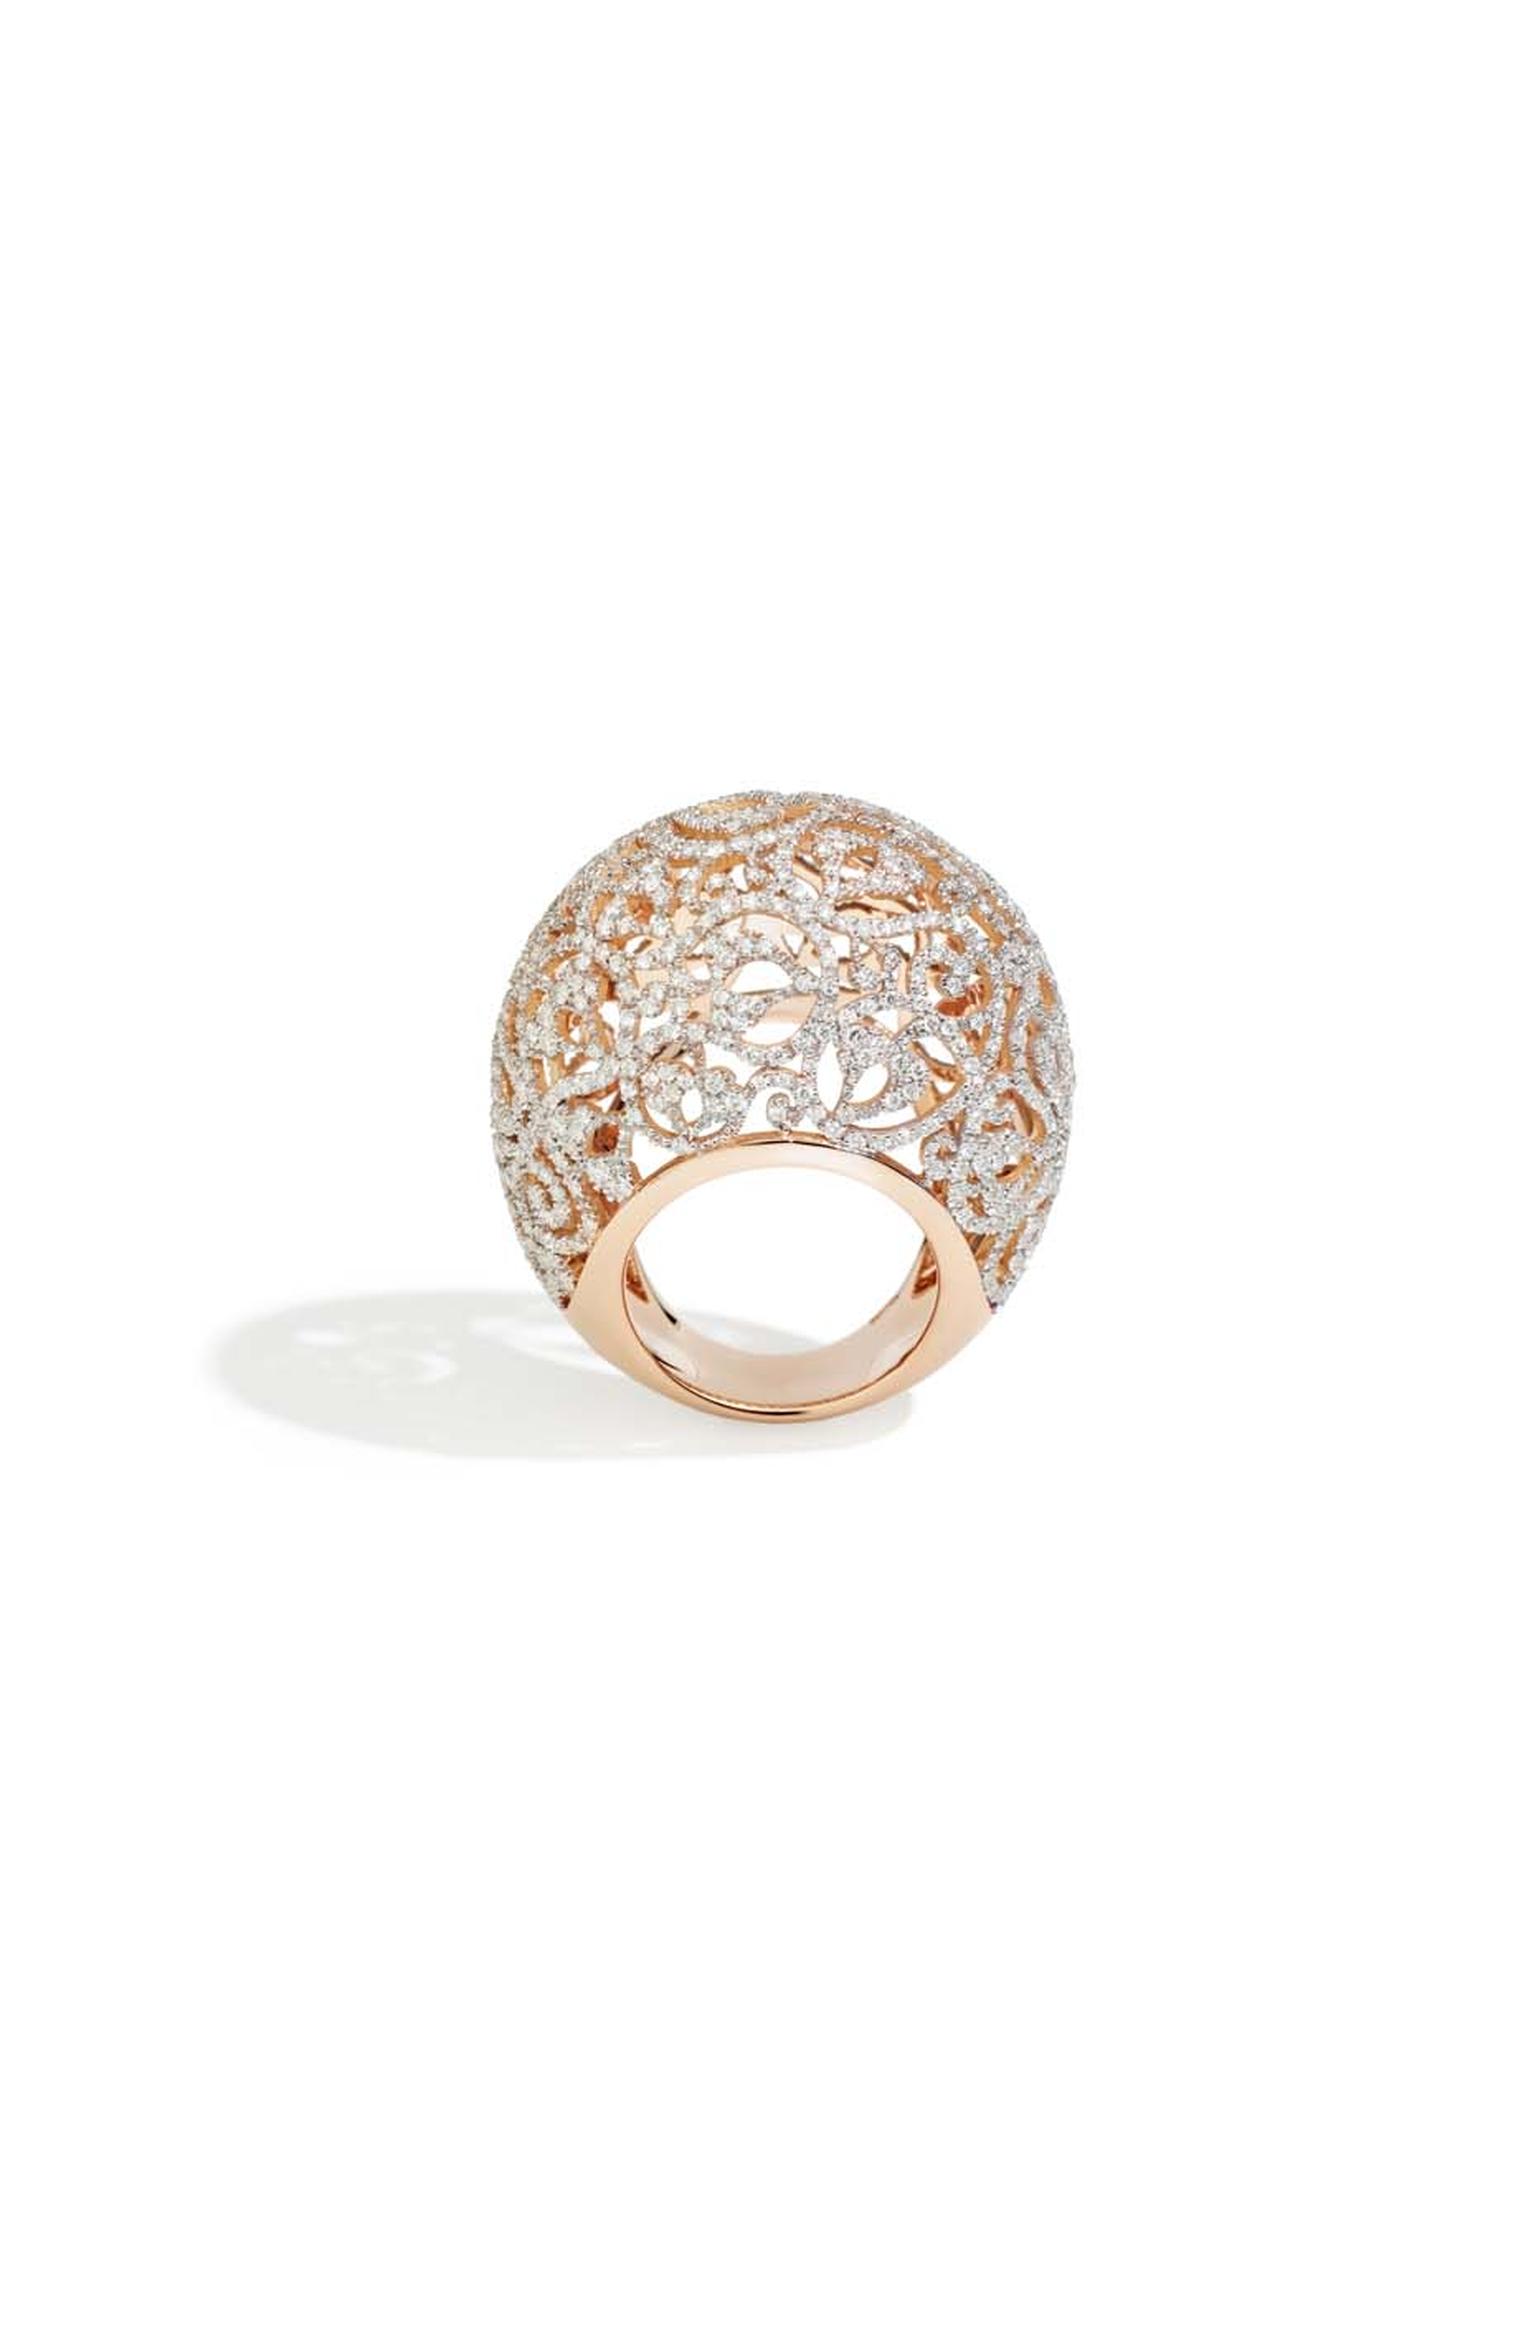 Pomellato Arabesque ring in polished rhodium-plated rose gold, set with 670 diamonds (£15,700).